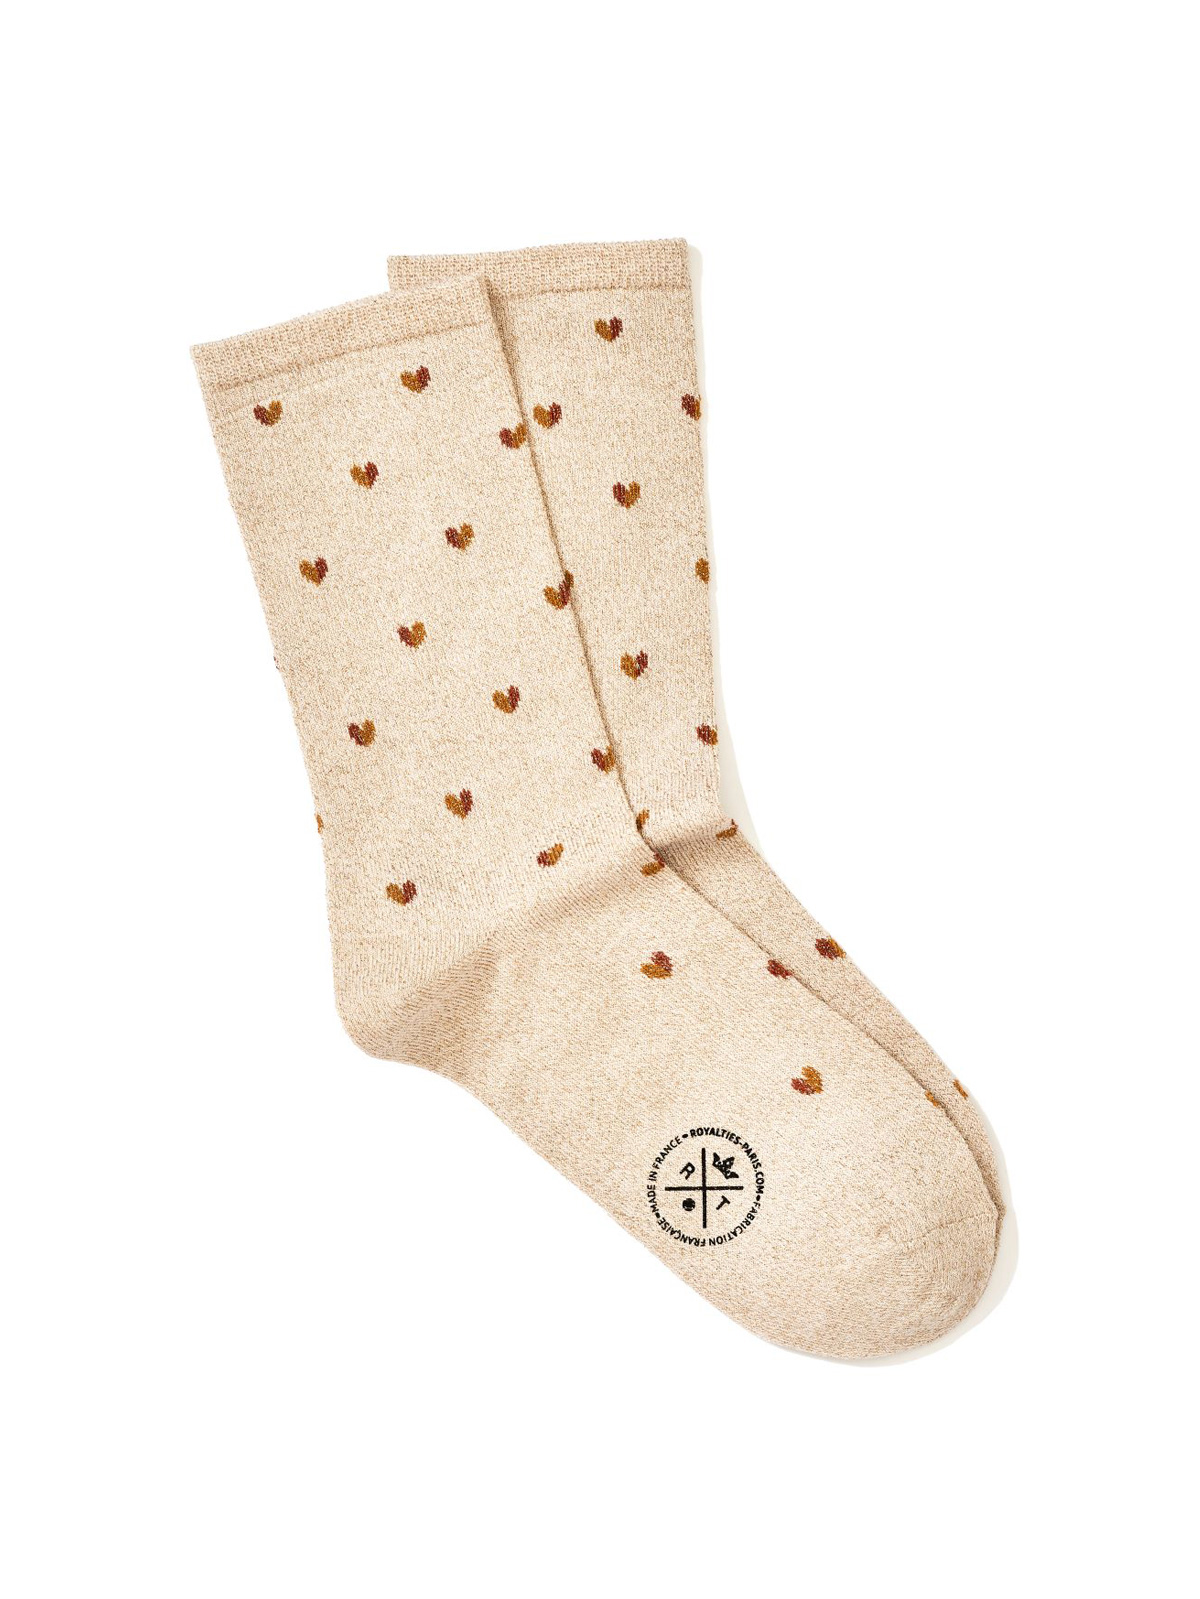 ROYALTIES Chaussettes LOVE Or